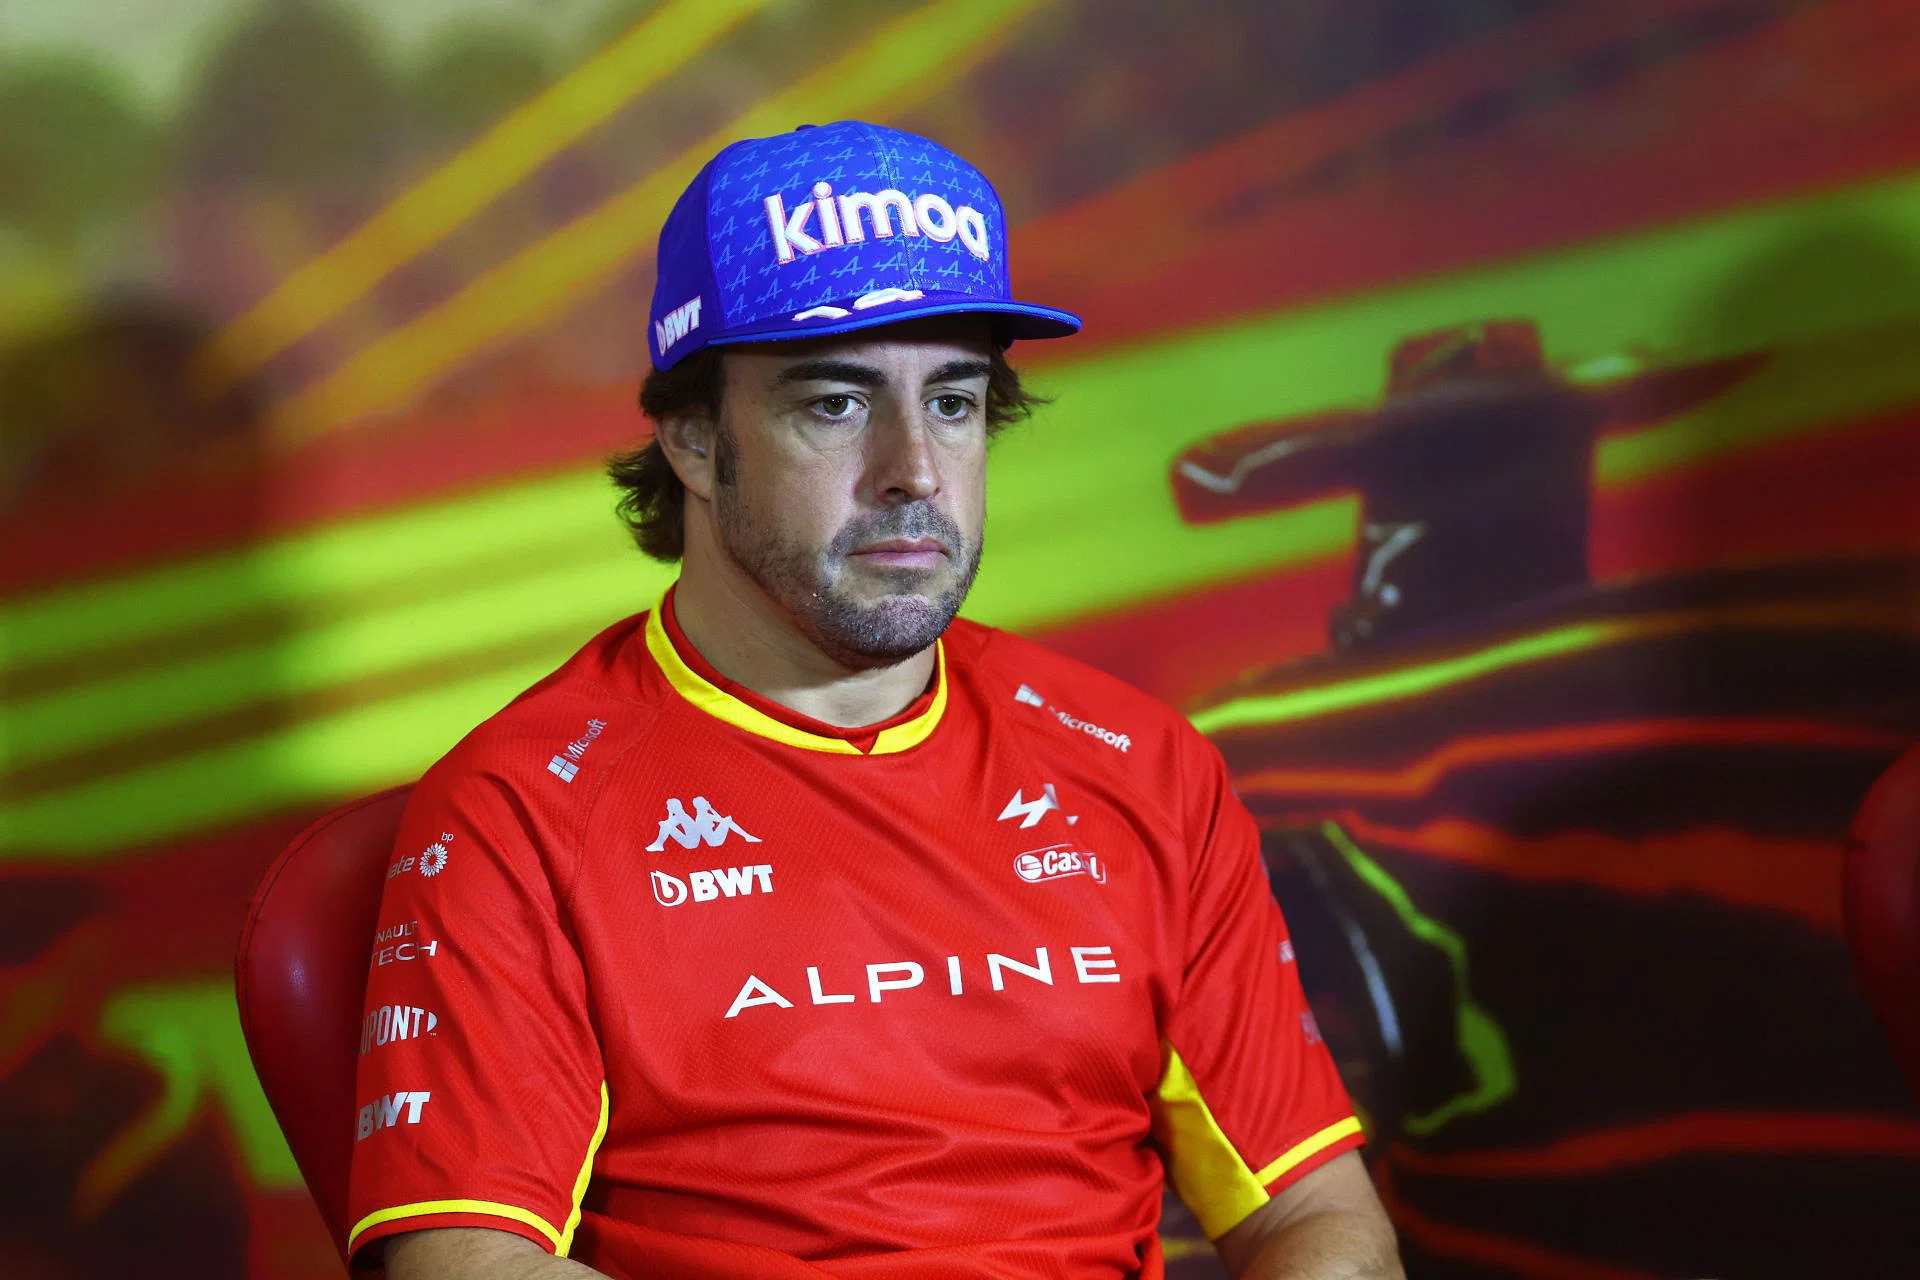 Alonso issues an apology after F1 stewards comment